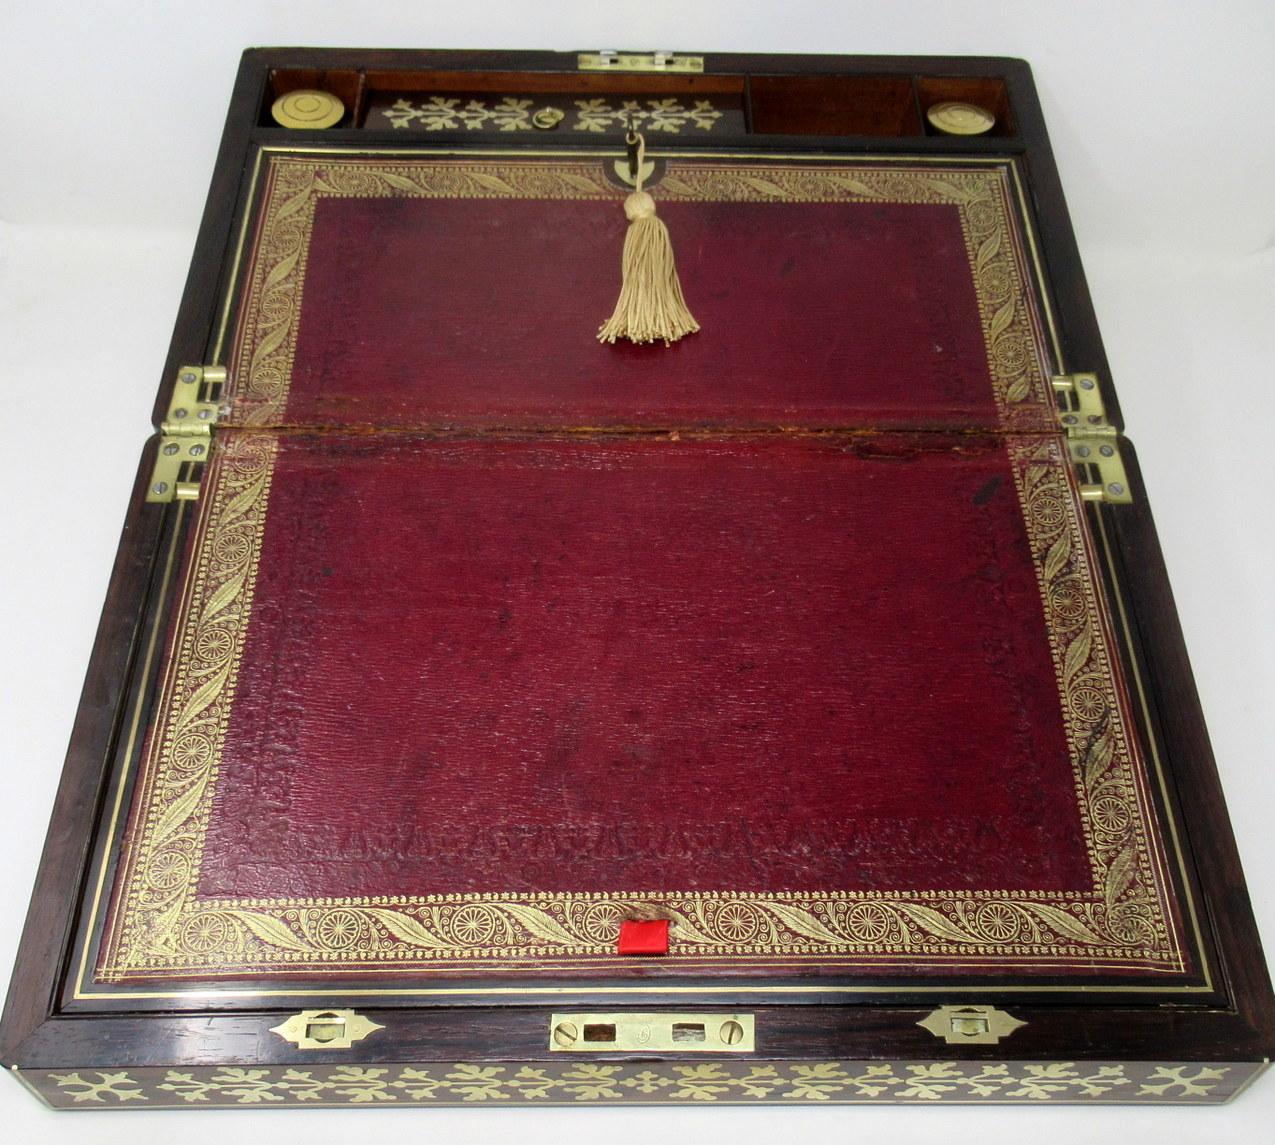 Antique Regency Brass Inlaid Mahogany Traveling Desk Wooden Writing Slope Box In Good Condition For Sale In Dublin, Ireland